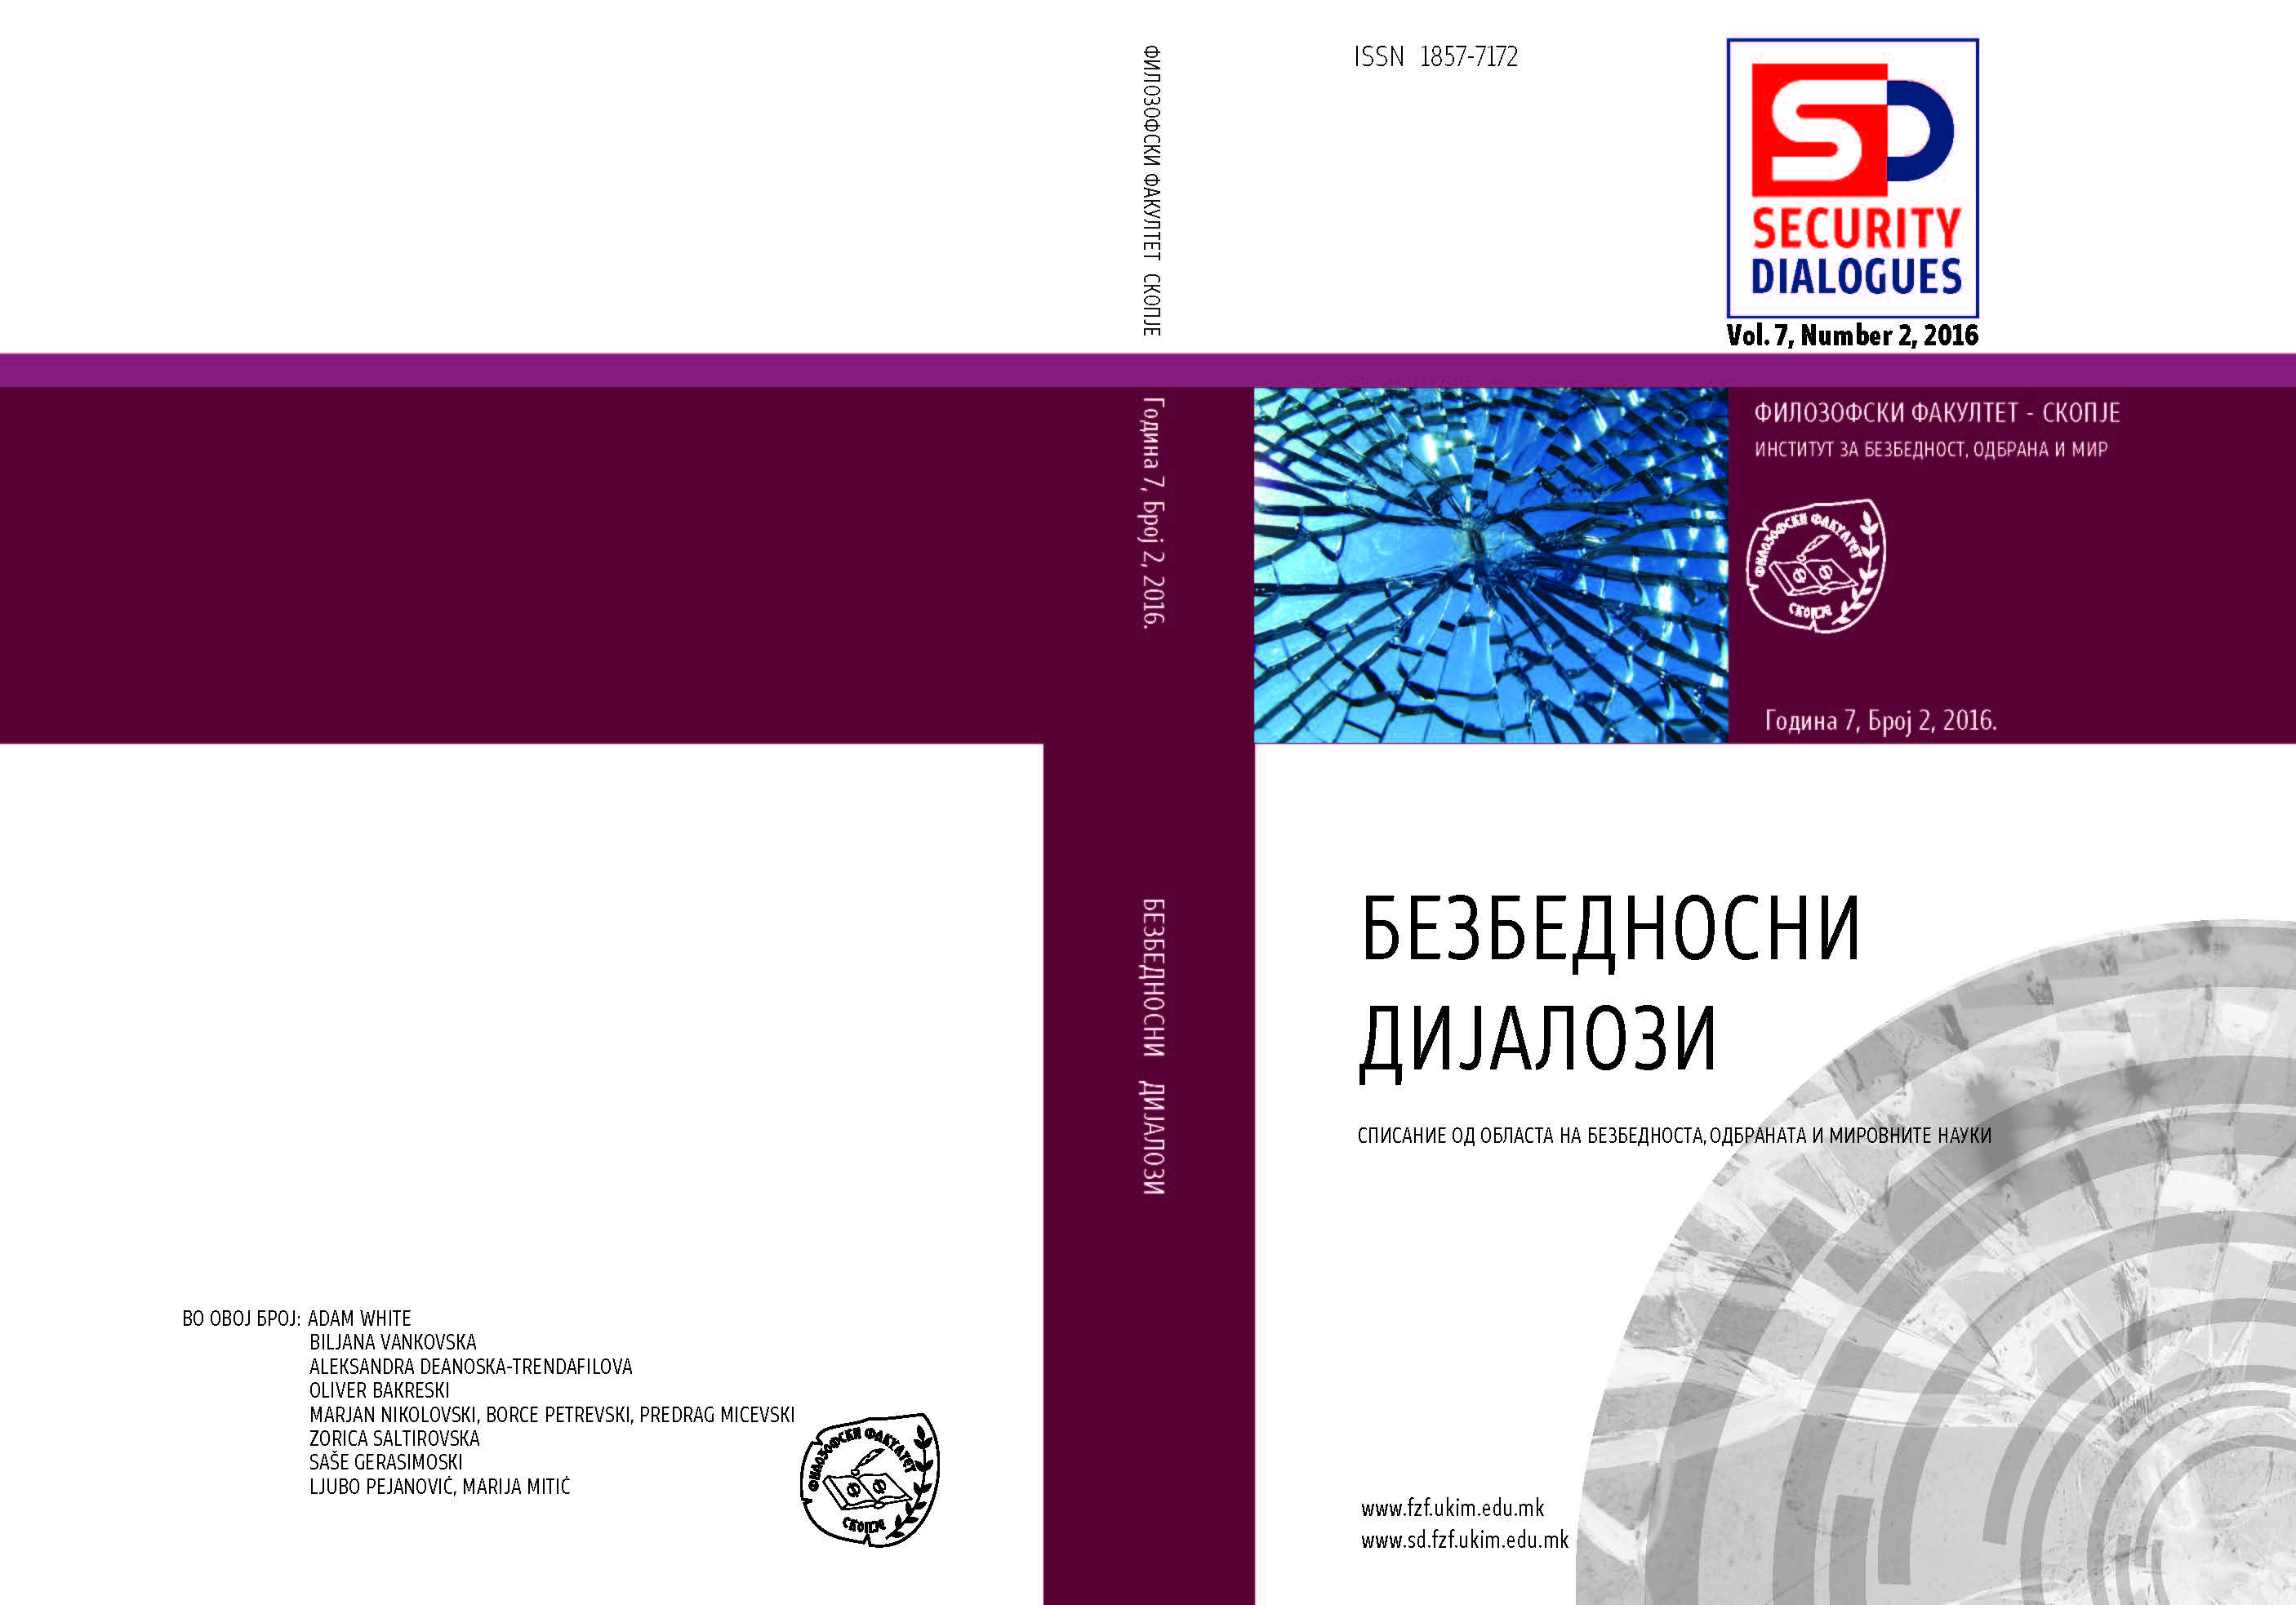 Corporate Security in Private Sector of the Republic of Serbia Cover Image